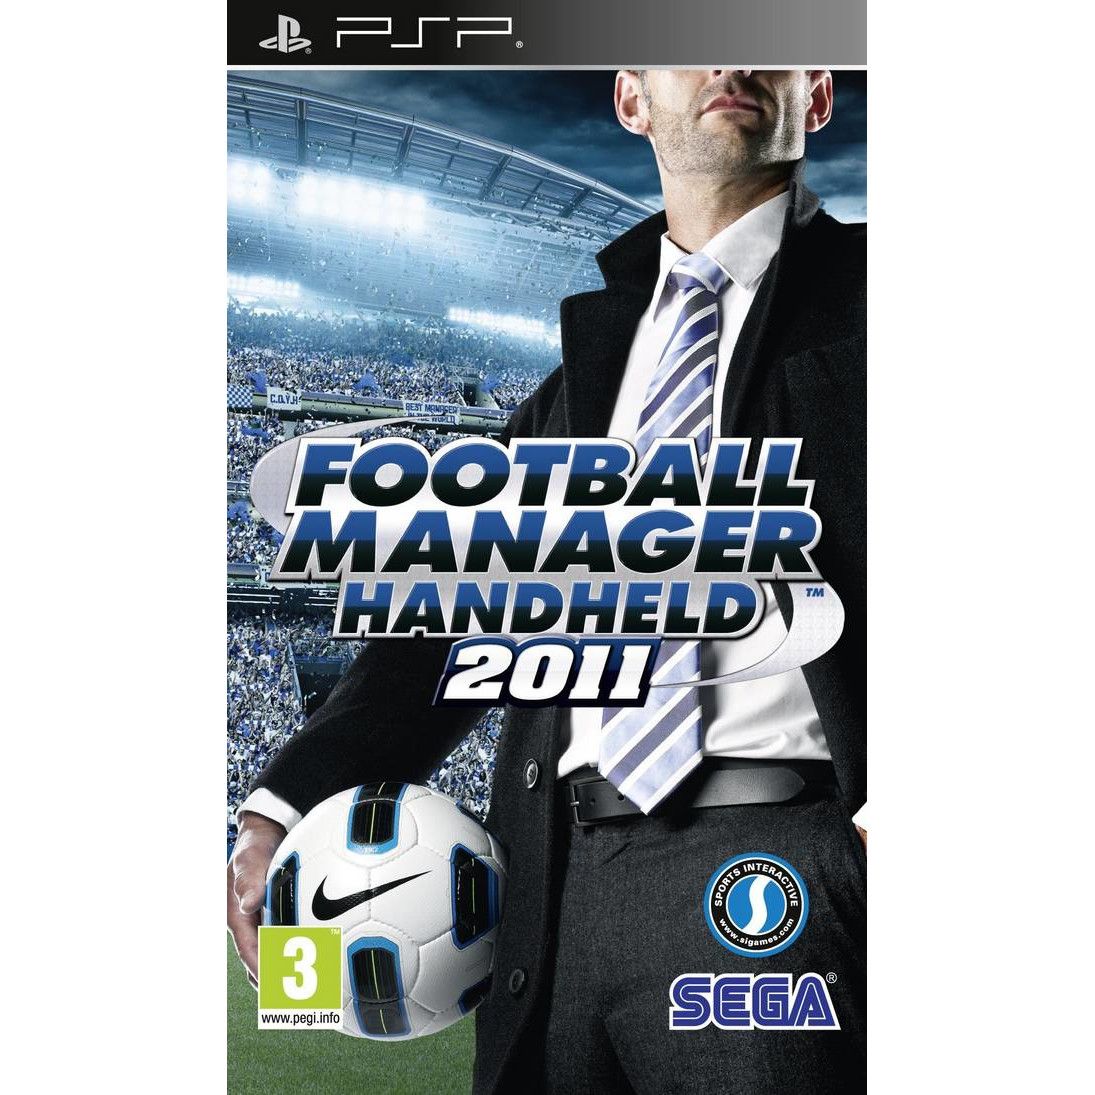 Football Manager Hndheld 2011